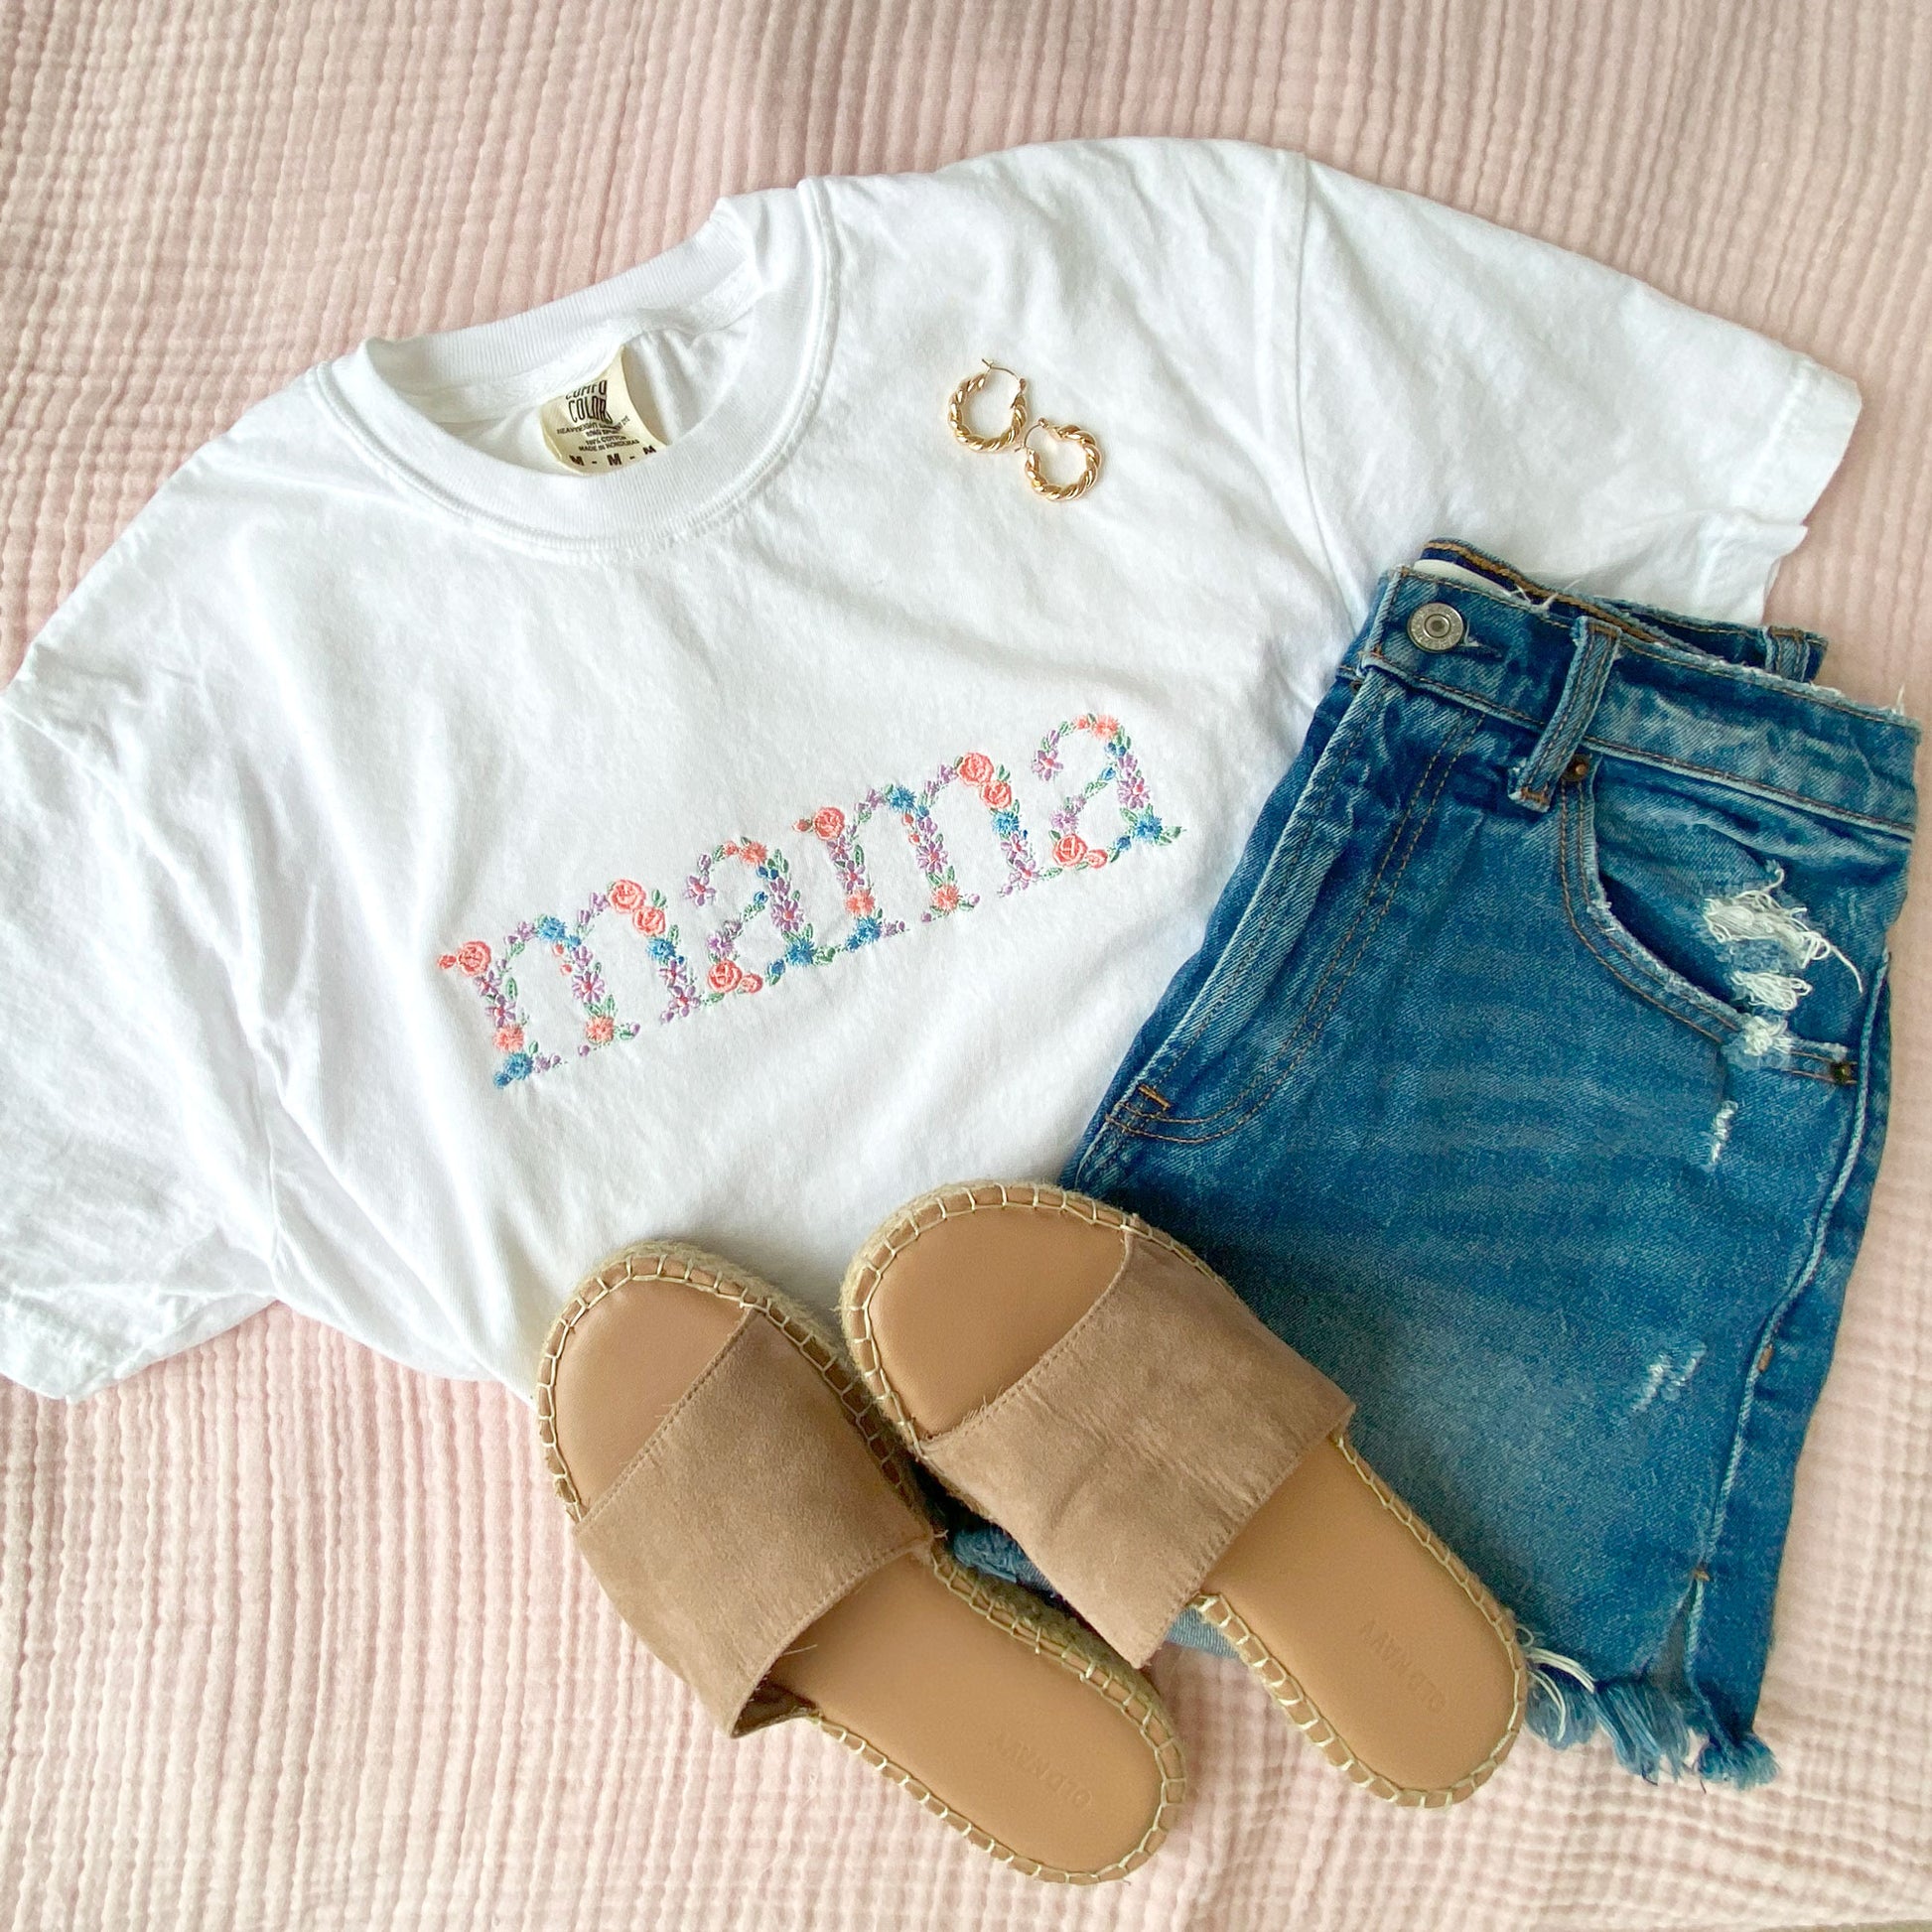 white comfort colors t-shirt with embroidered mama floral design paired with sandals and jean shorts